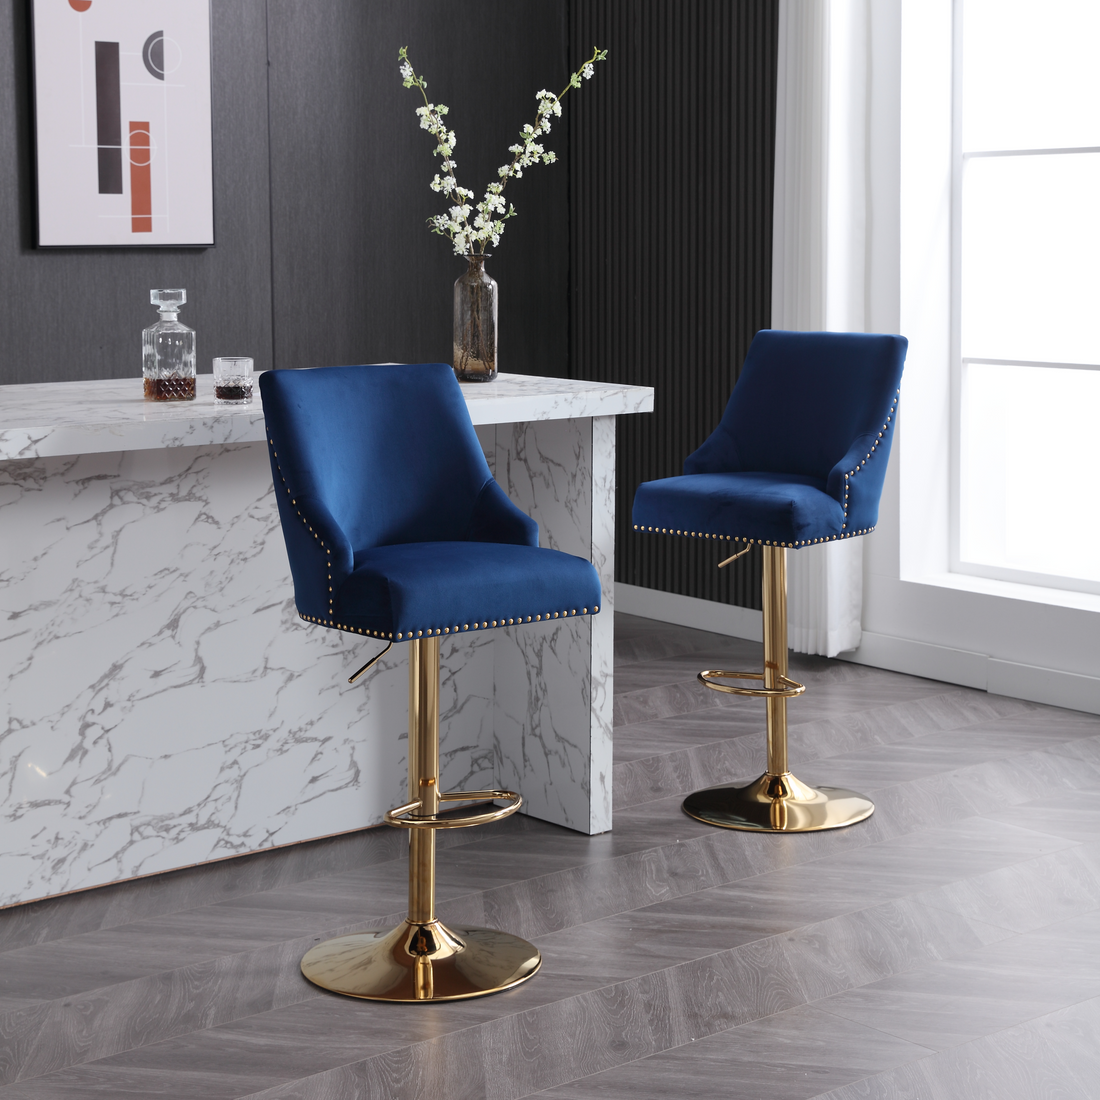 Hengming Golden Rivet Bar Chair With Pull Ring,